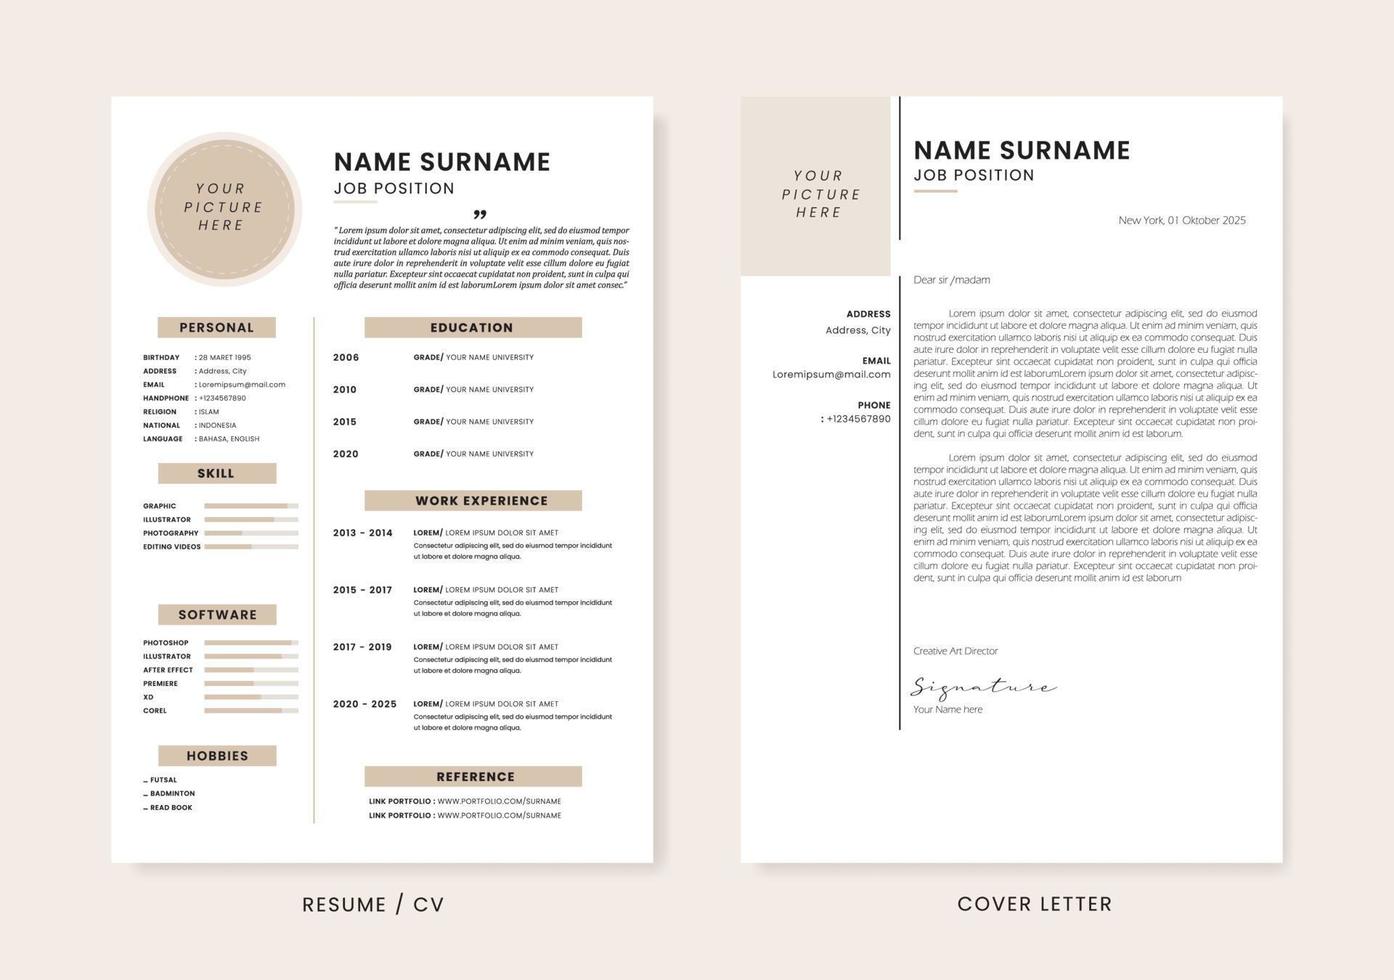 Minimalis CV Resume and Cover Letter Design Template. Super Clean and Clear Professional Modern Design. Stylish Minimalis Elements and Icons with Soft Brown Color - Vector Template.